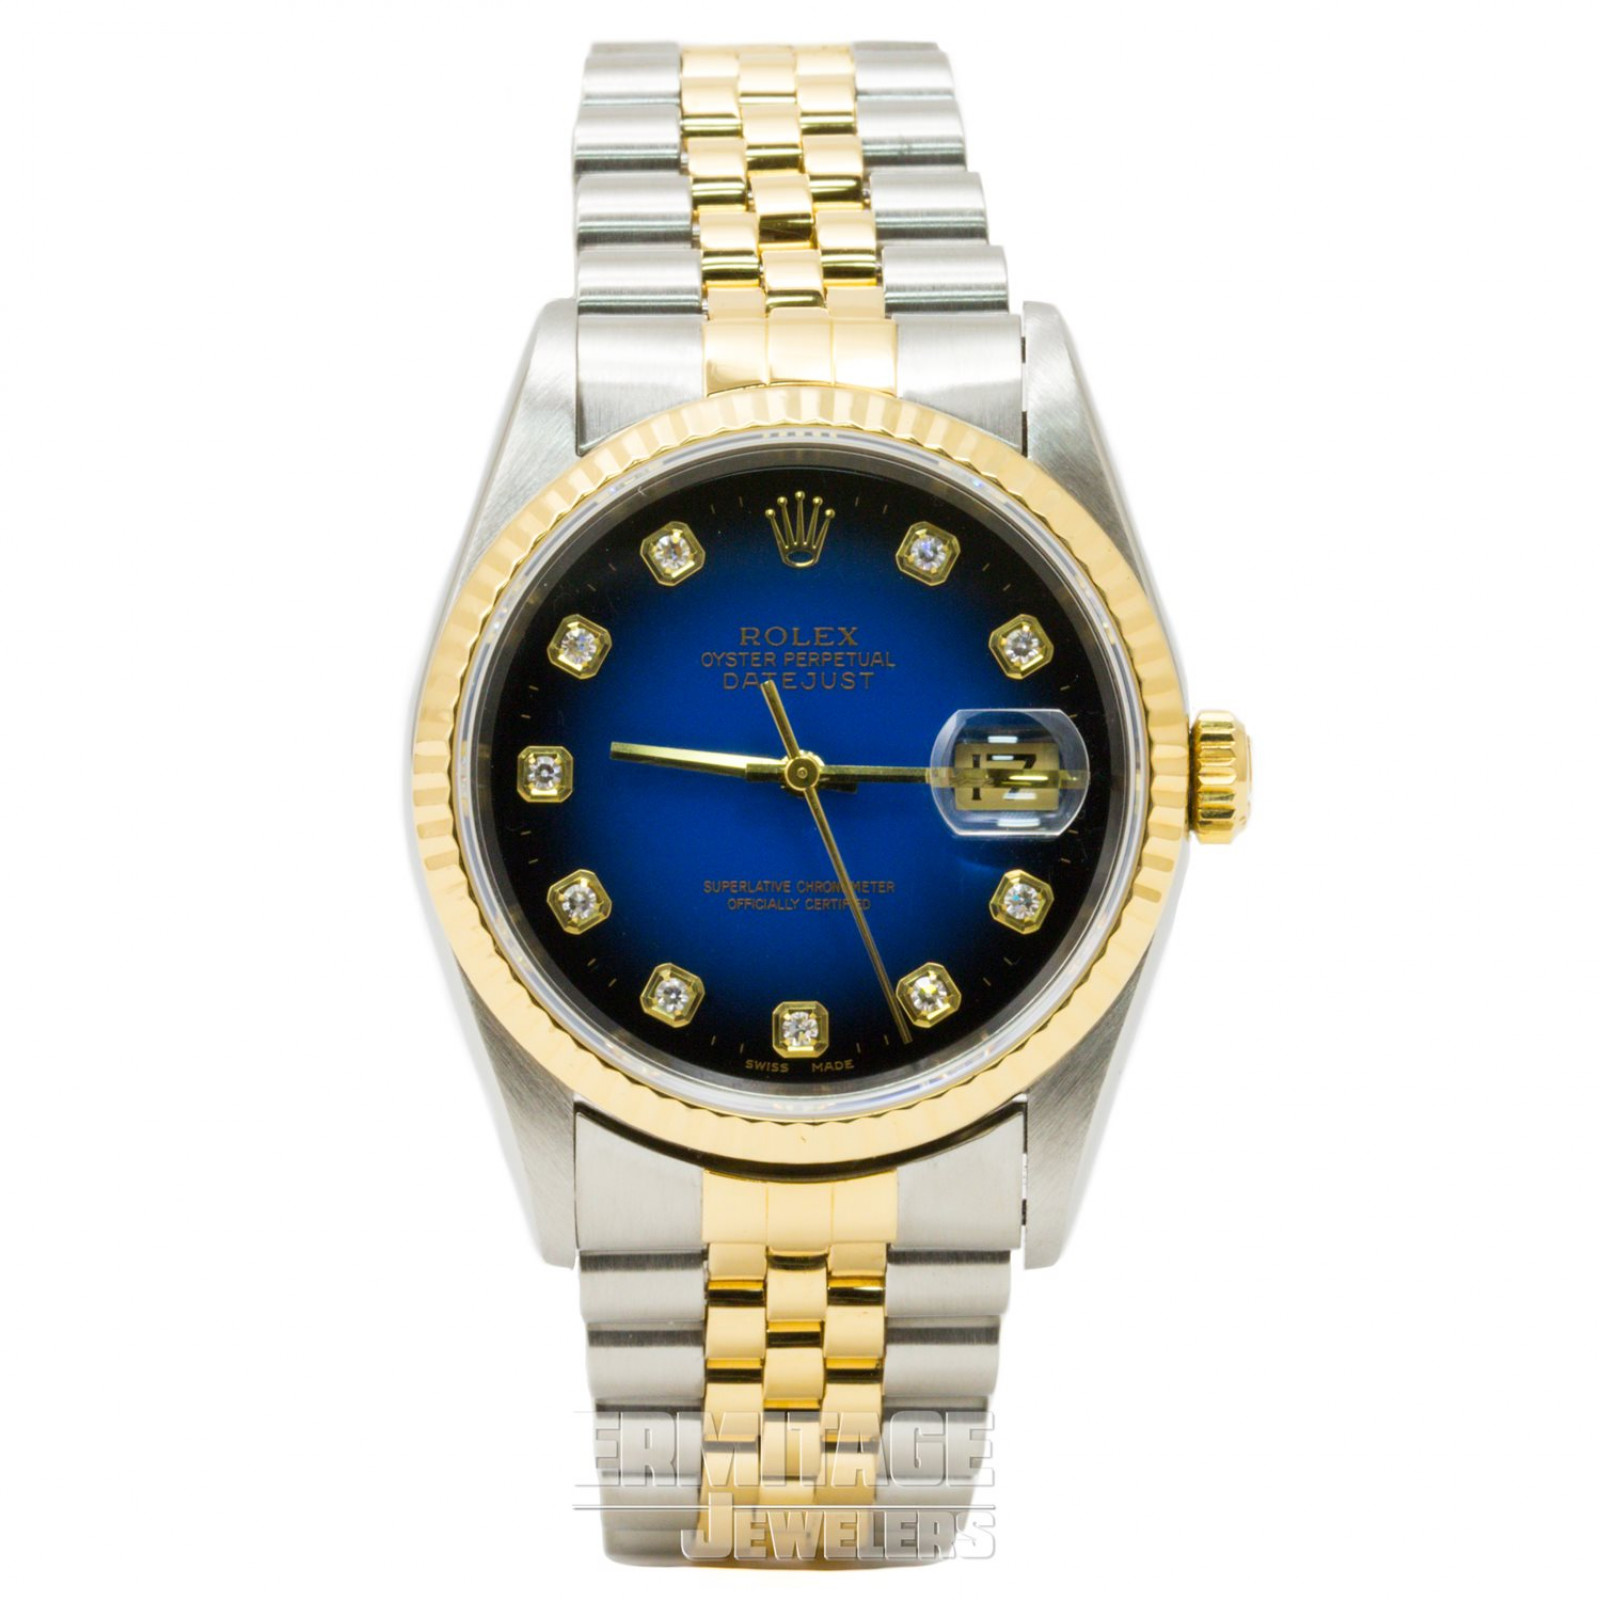 Rolex Datejust 16233 with Blue Dial